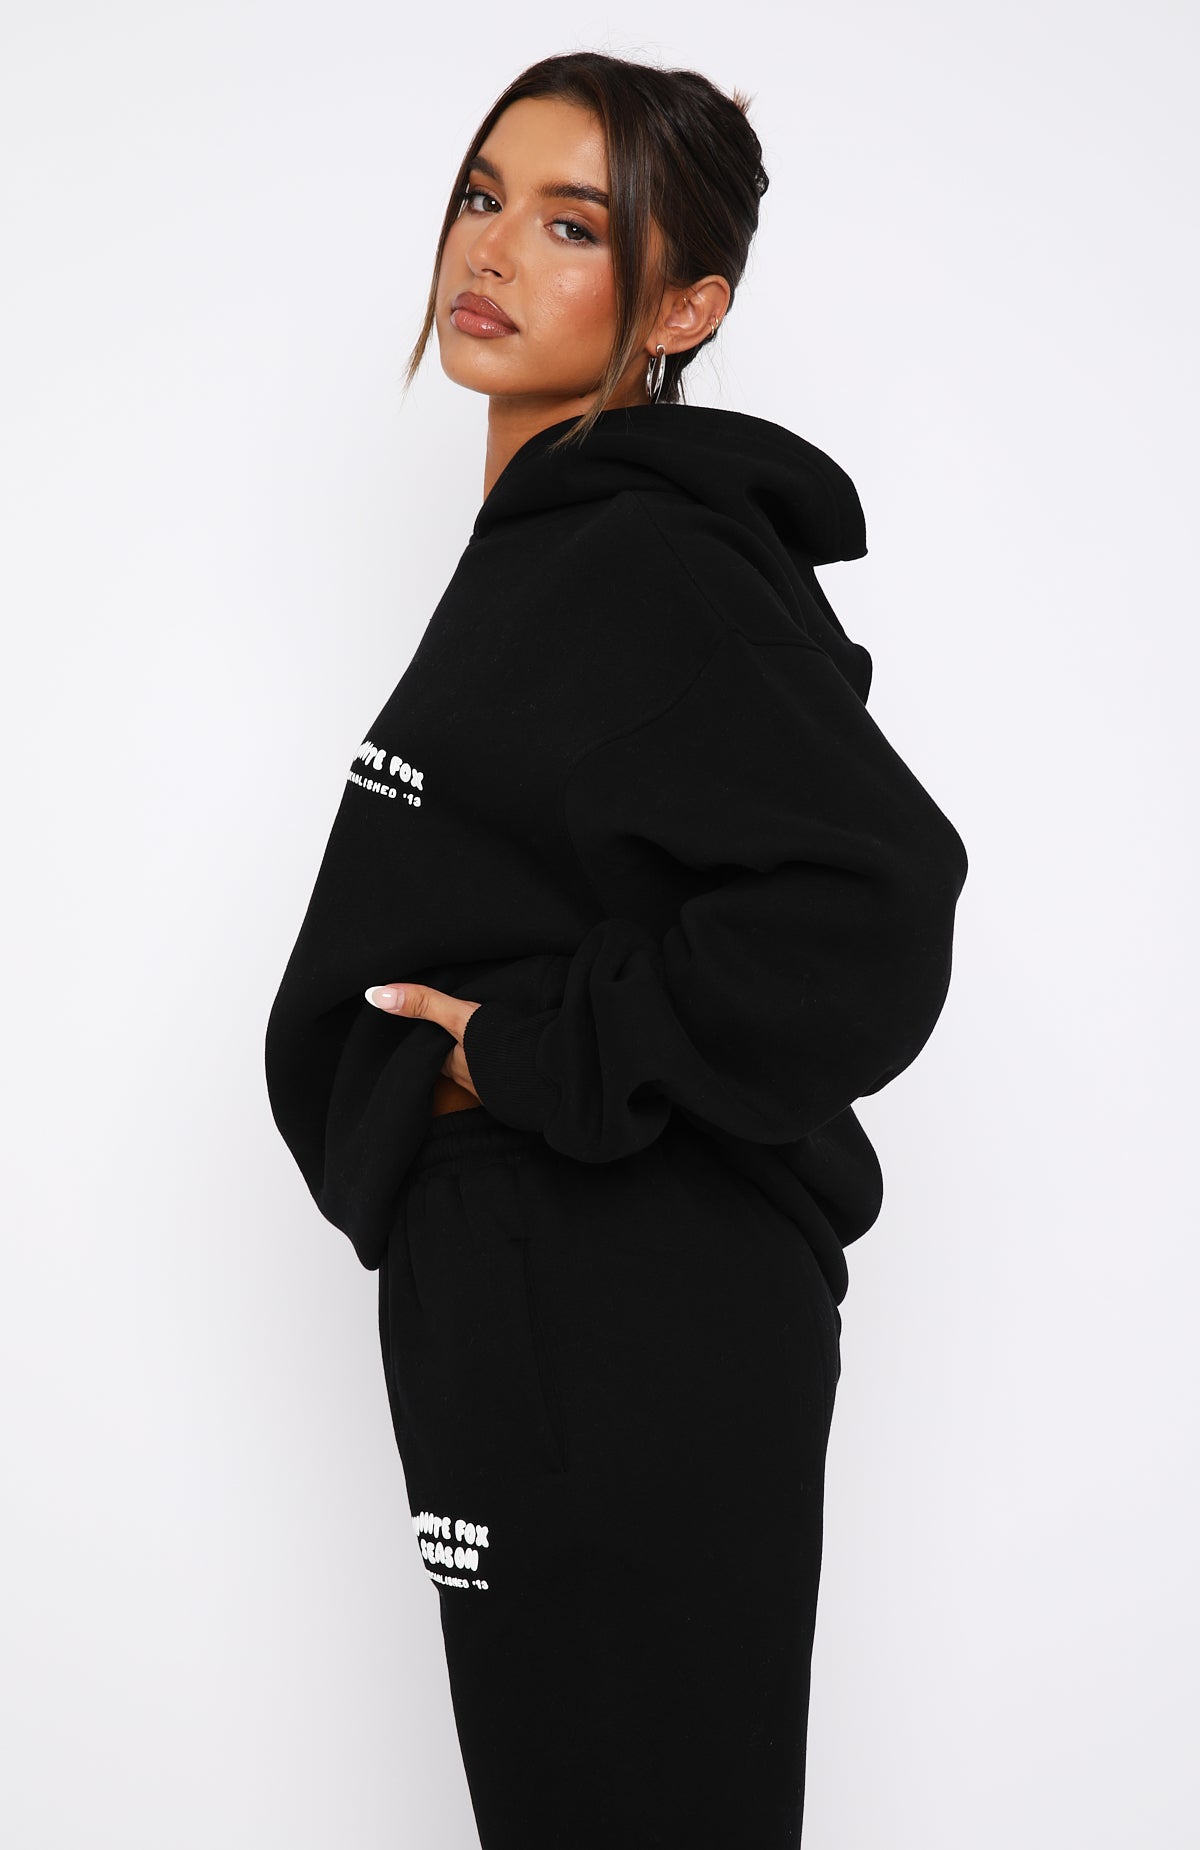 It's Officially Oversized Sweatshirt Season, and These 11 Hoodies